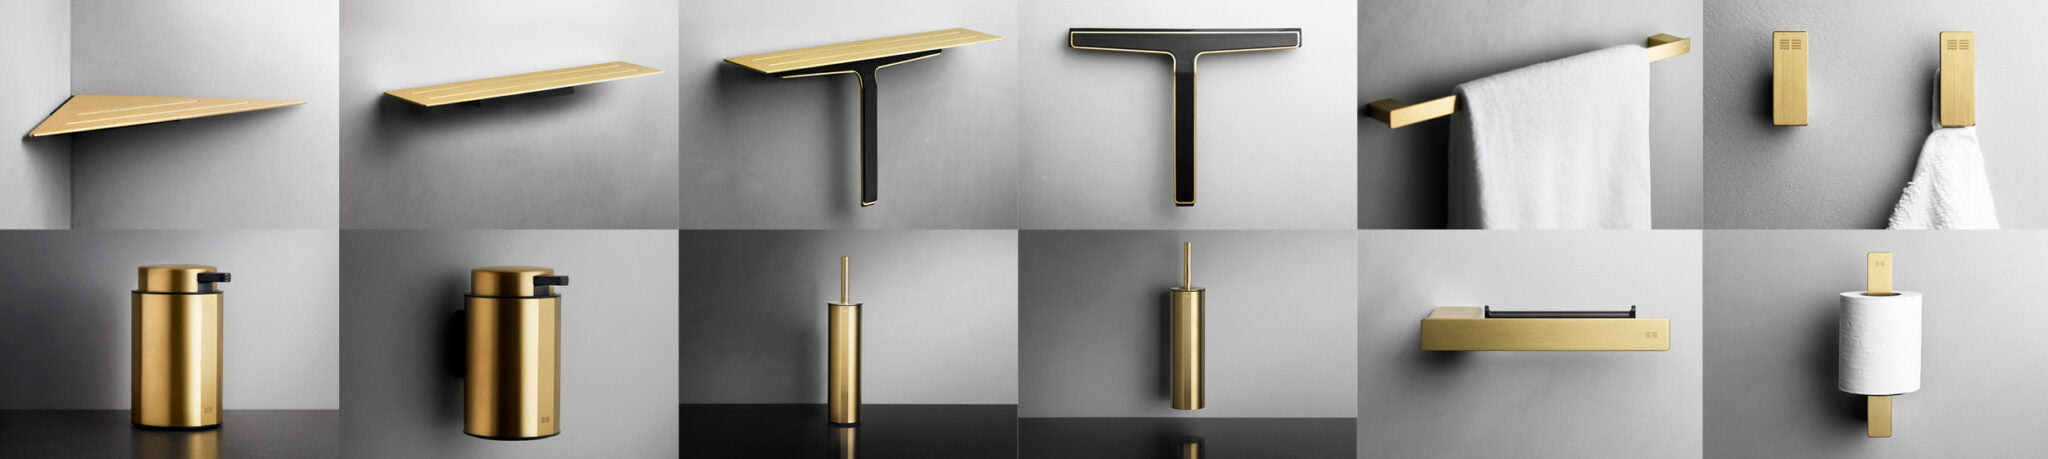 Buy brushed gold bathroom accessories